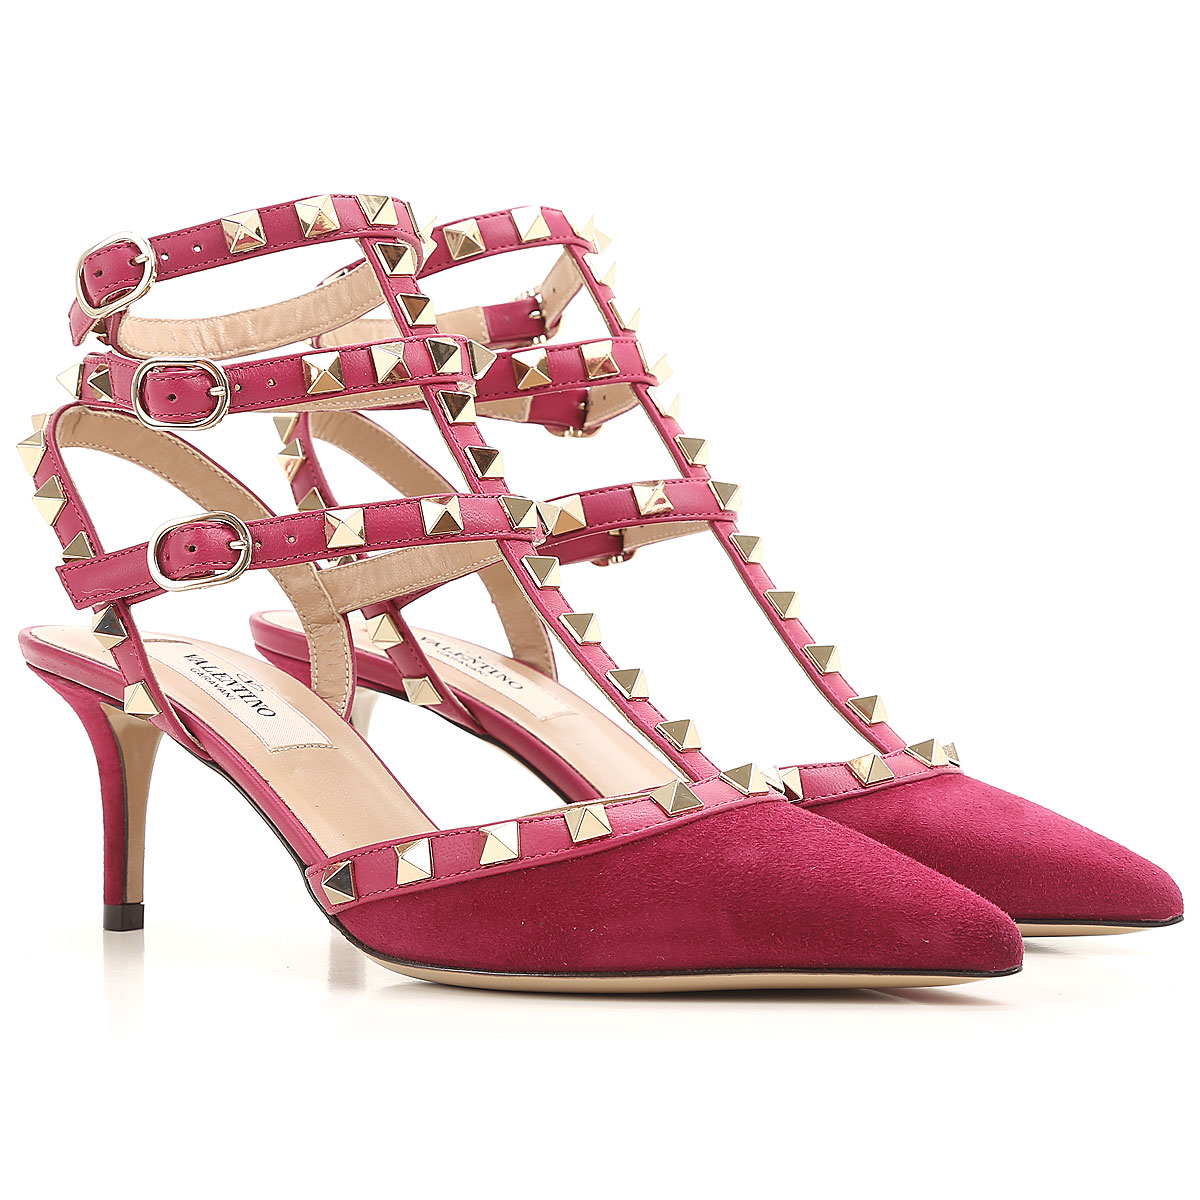 Womens Shoes Valentino Garavani, Style code: nw0s0375-wvw-0by